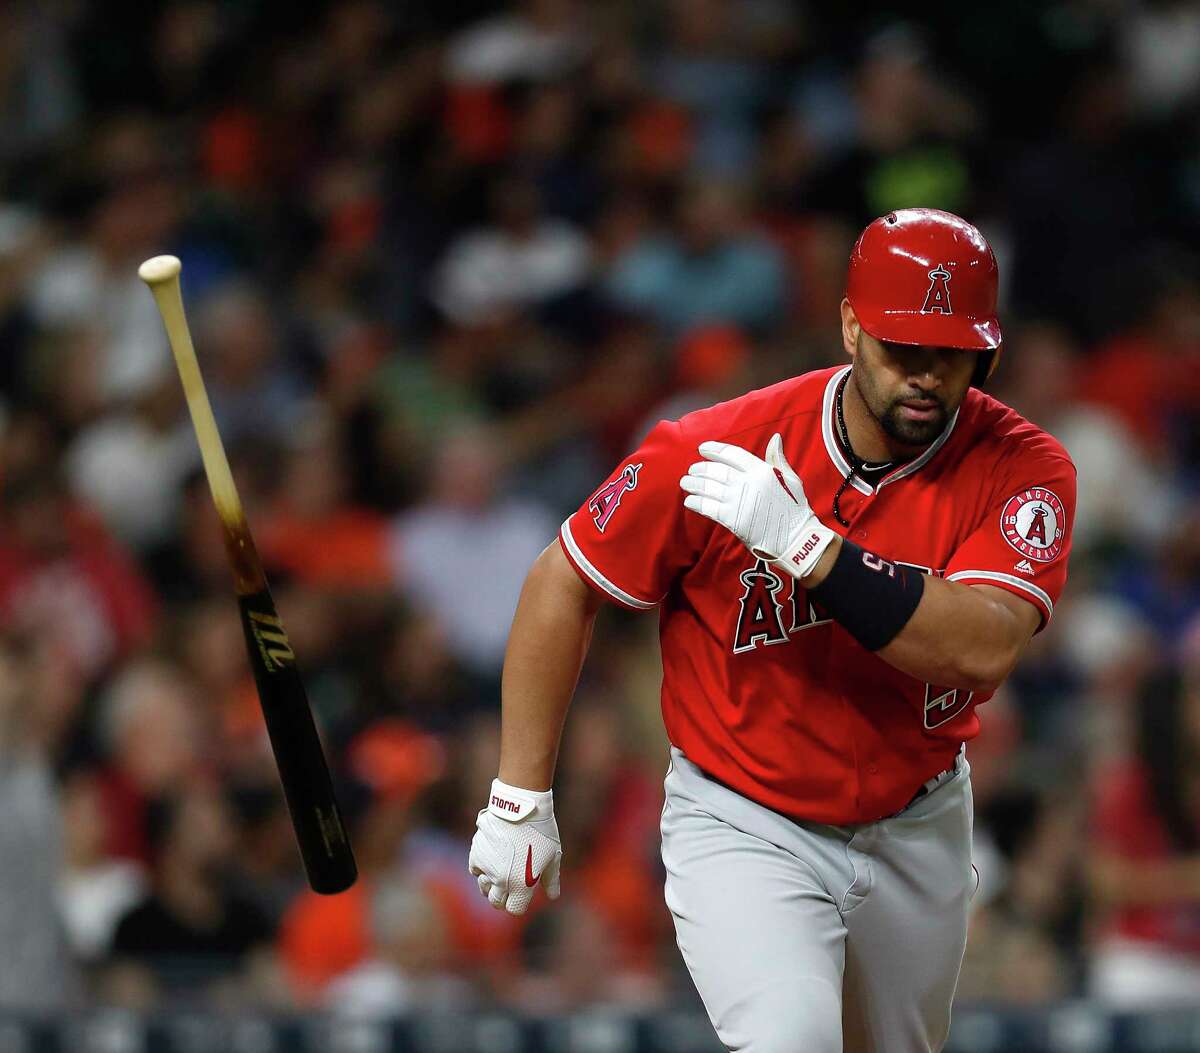 Los Angeles Angels designated hitter Albert Pujols (5) tosses his bat after hitting a three-run home run of of Astros starting pitcher Joe Musgrove during the fifth inning of an MLB baseball game at Minute Maid Park, Tuesday, April 18, 2017, in Houston.